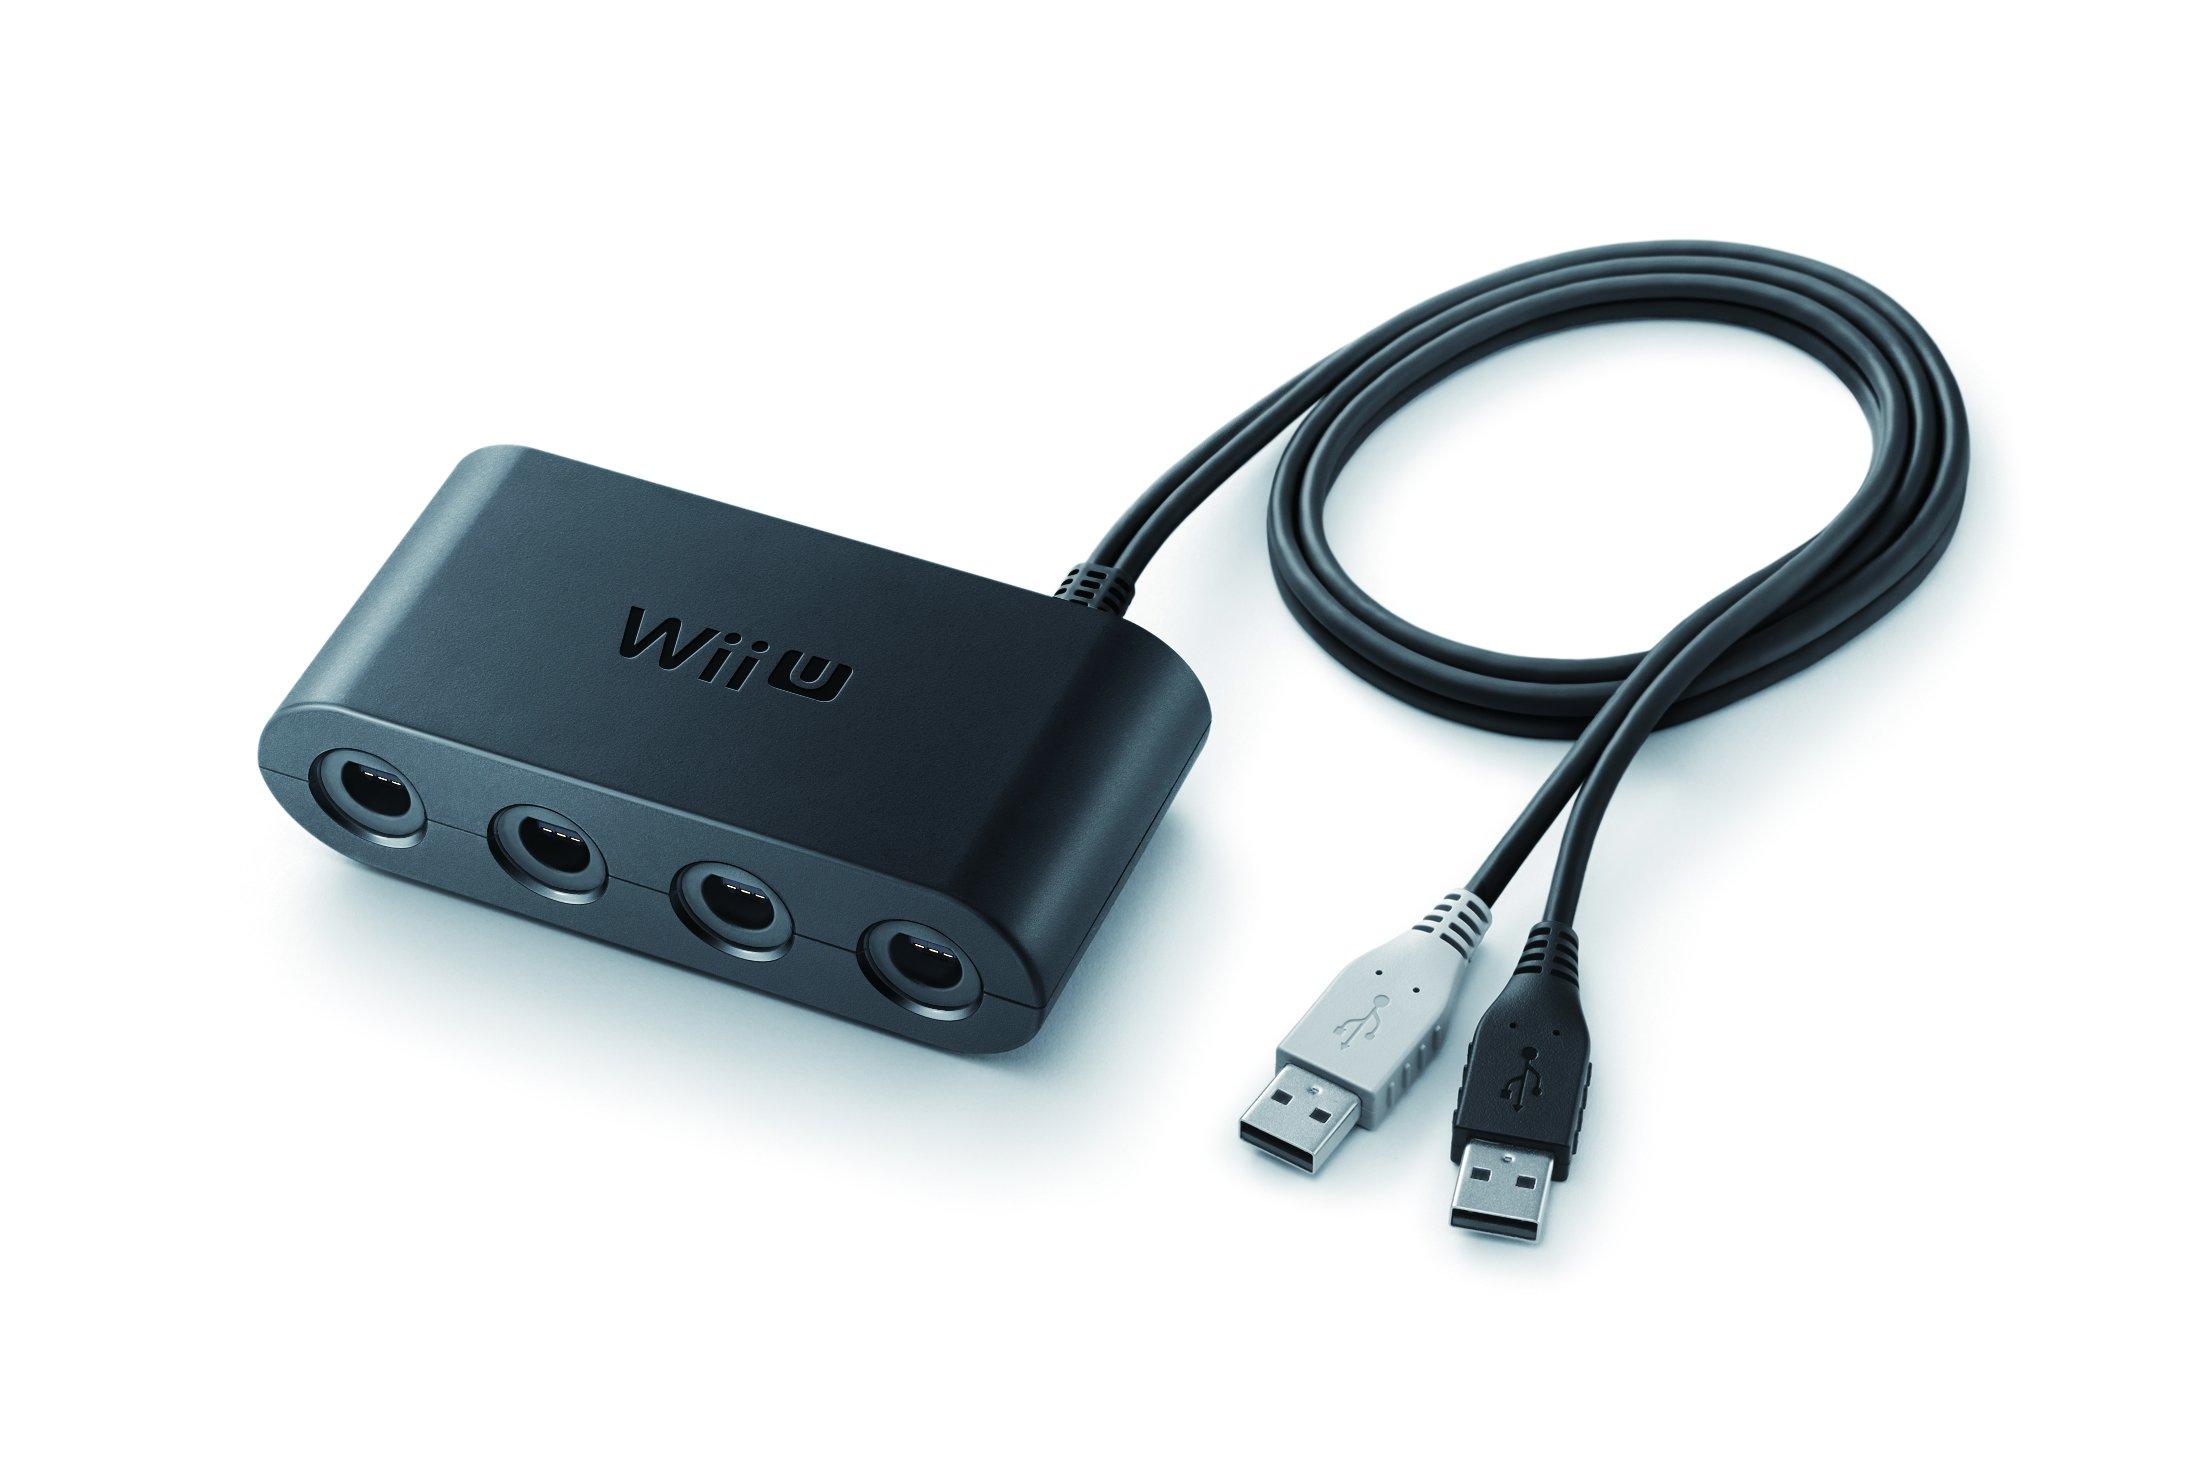 Nintendo Wii U GameCube Controller Adapter (Styles May Vary)